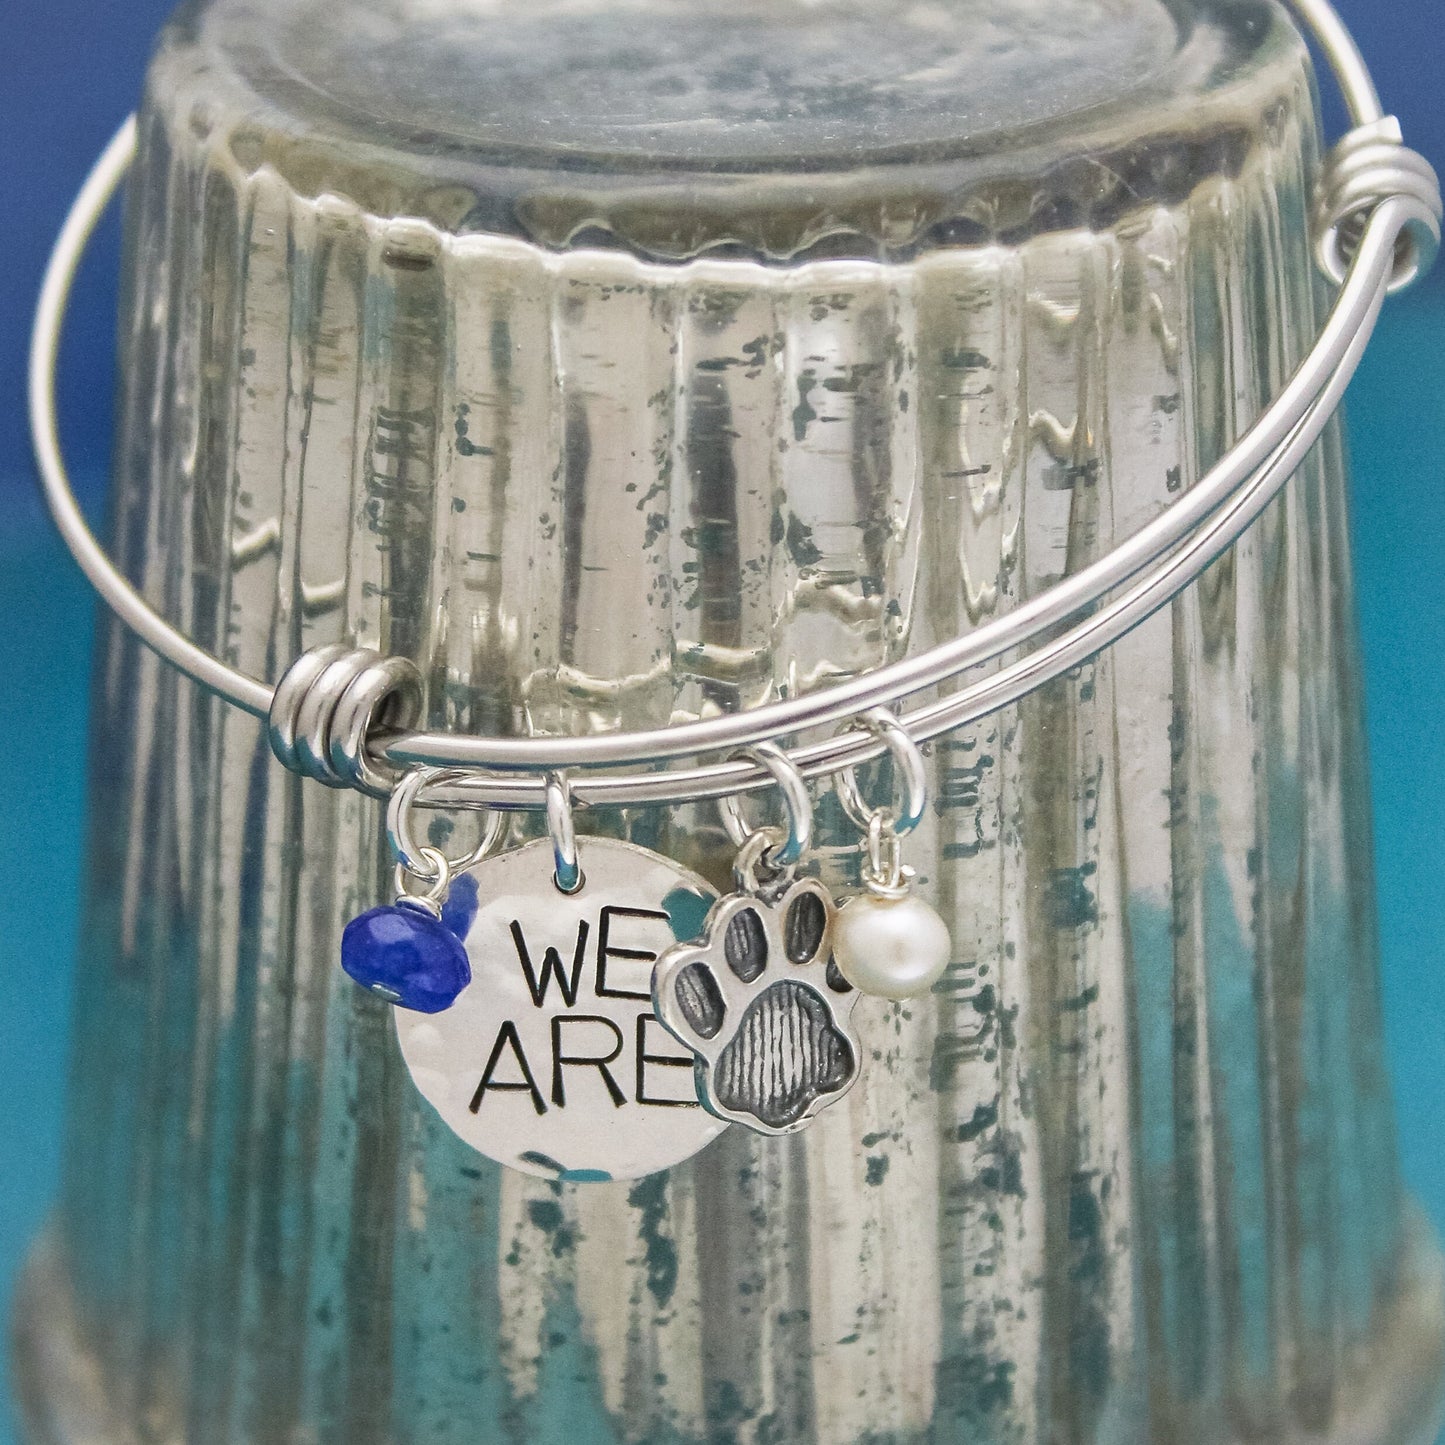 We Are Bangle, Penn State Bracelet, Nittany Lions Gift, PSU Grad Gift, Graduation Gift for Penn State, Hand Stamped Jewelry